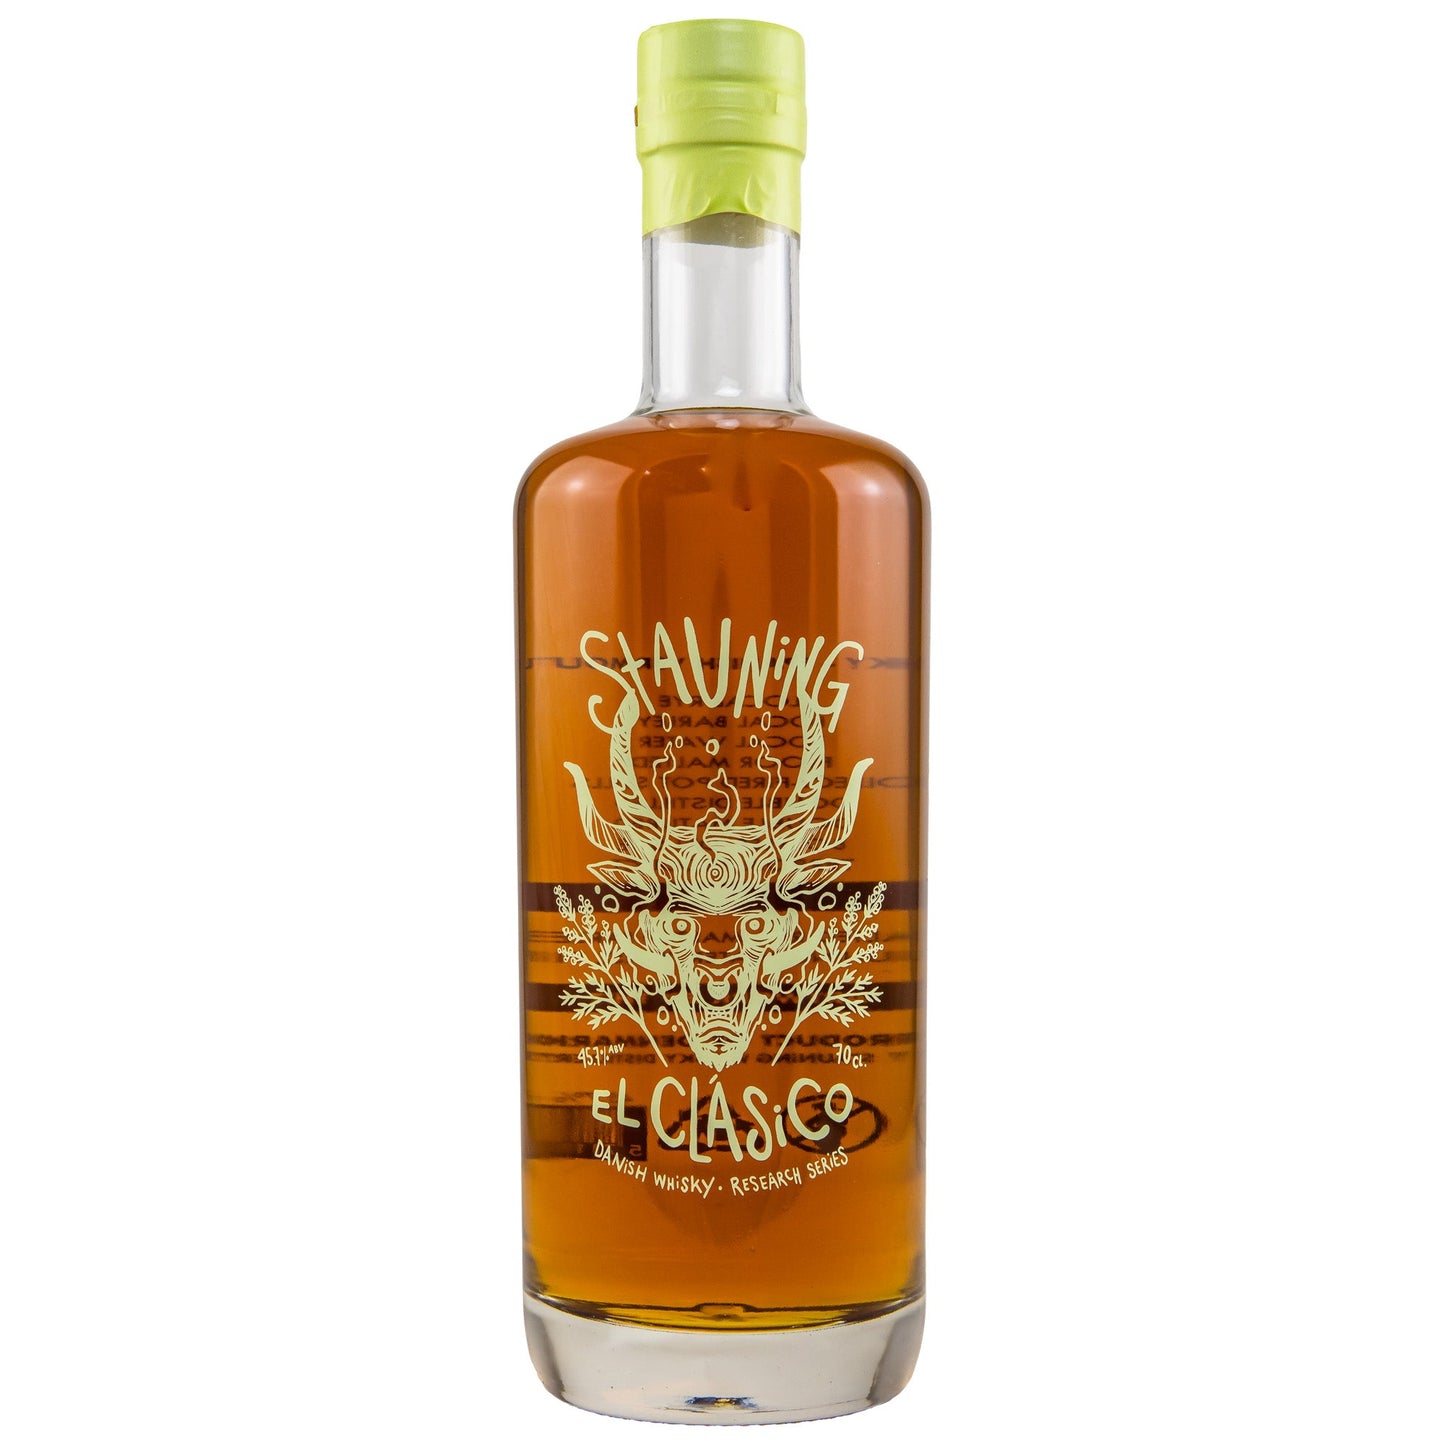 Stauning | El Clasico | Rye | Vermouth Finish | Danish Whisky | 45,7%GET A BOTTLE